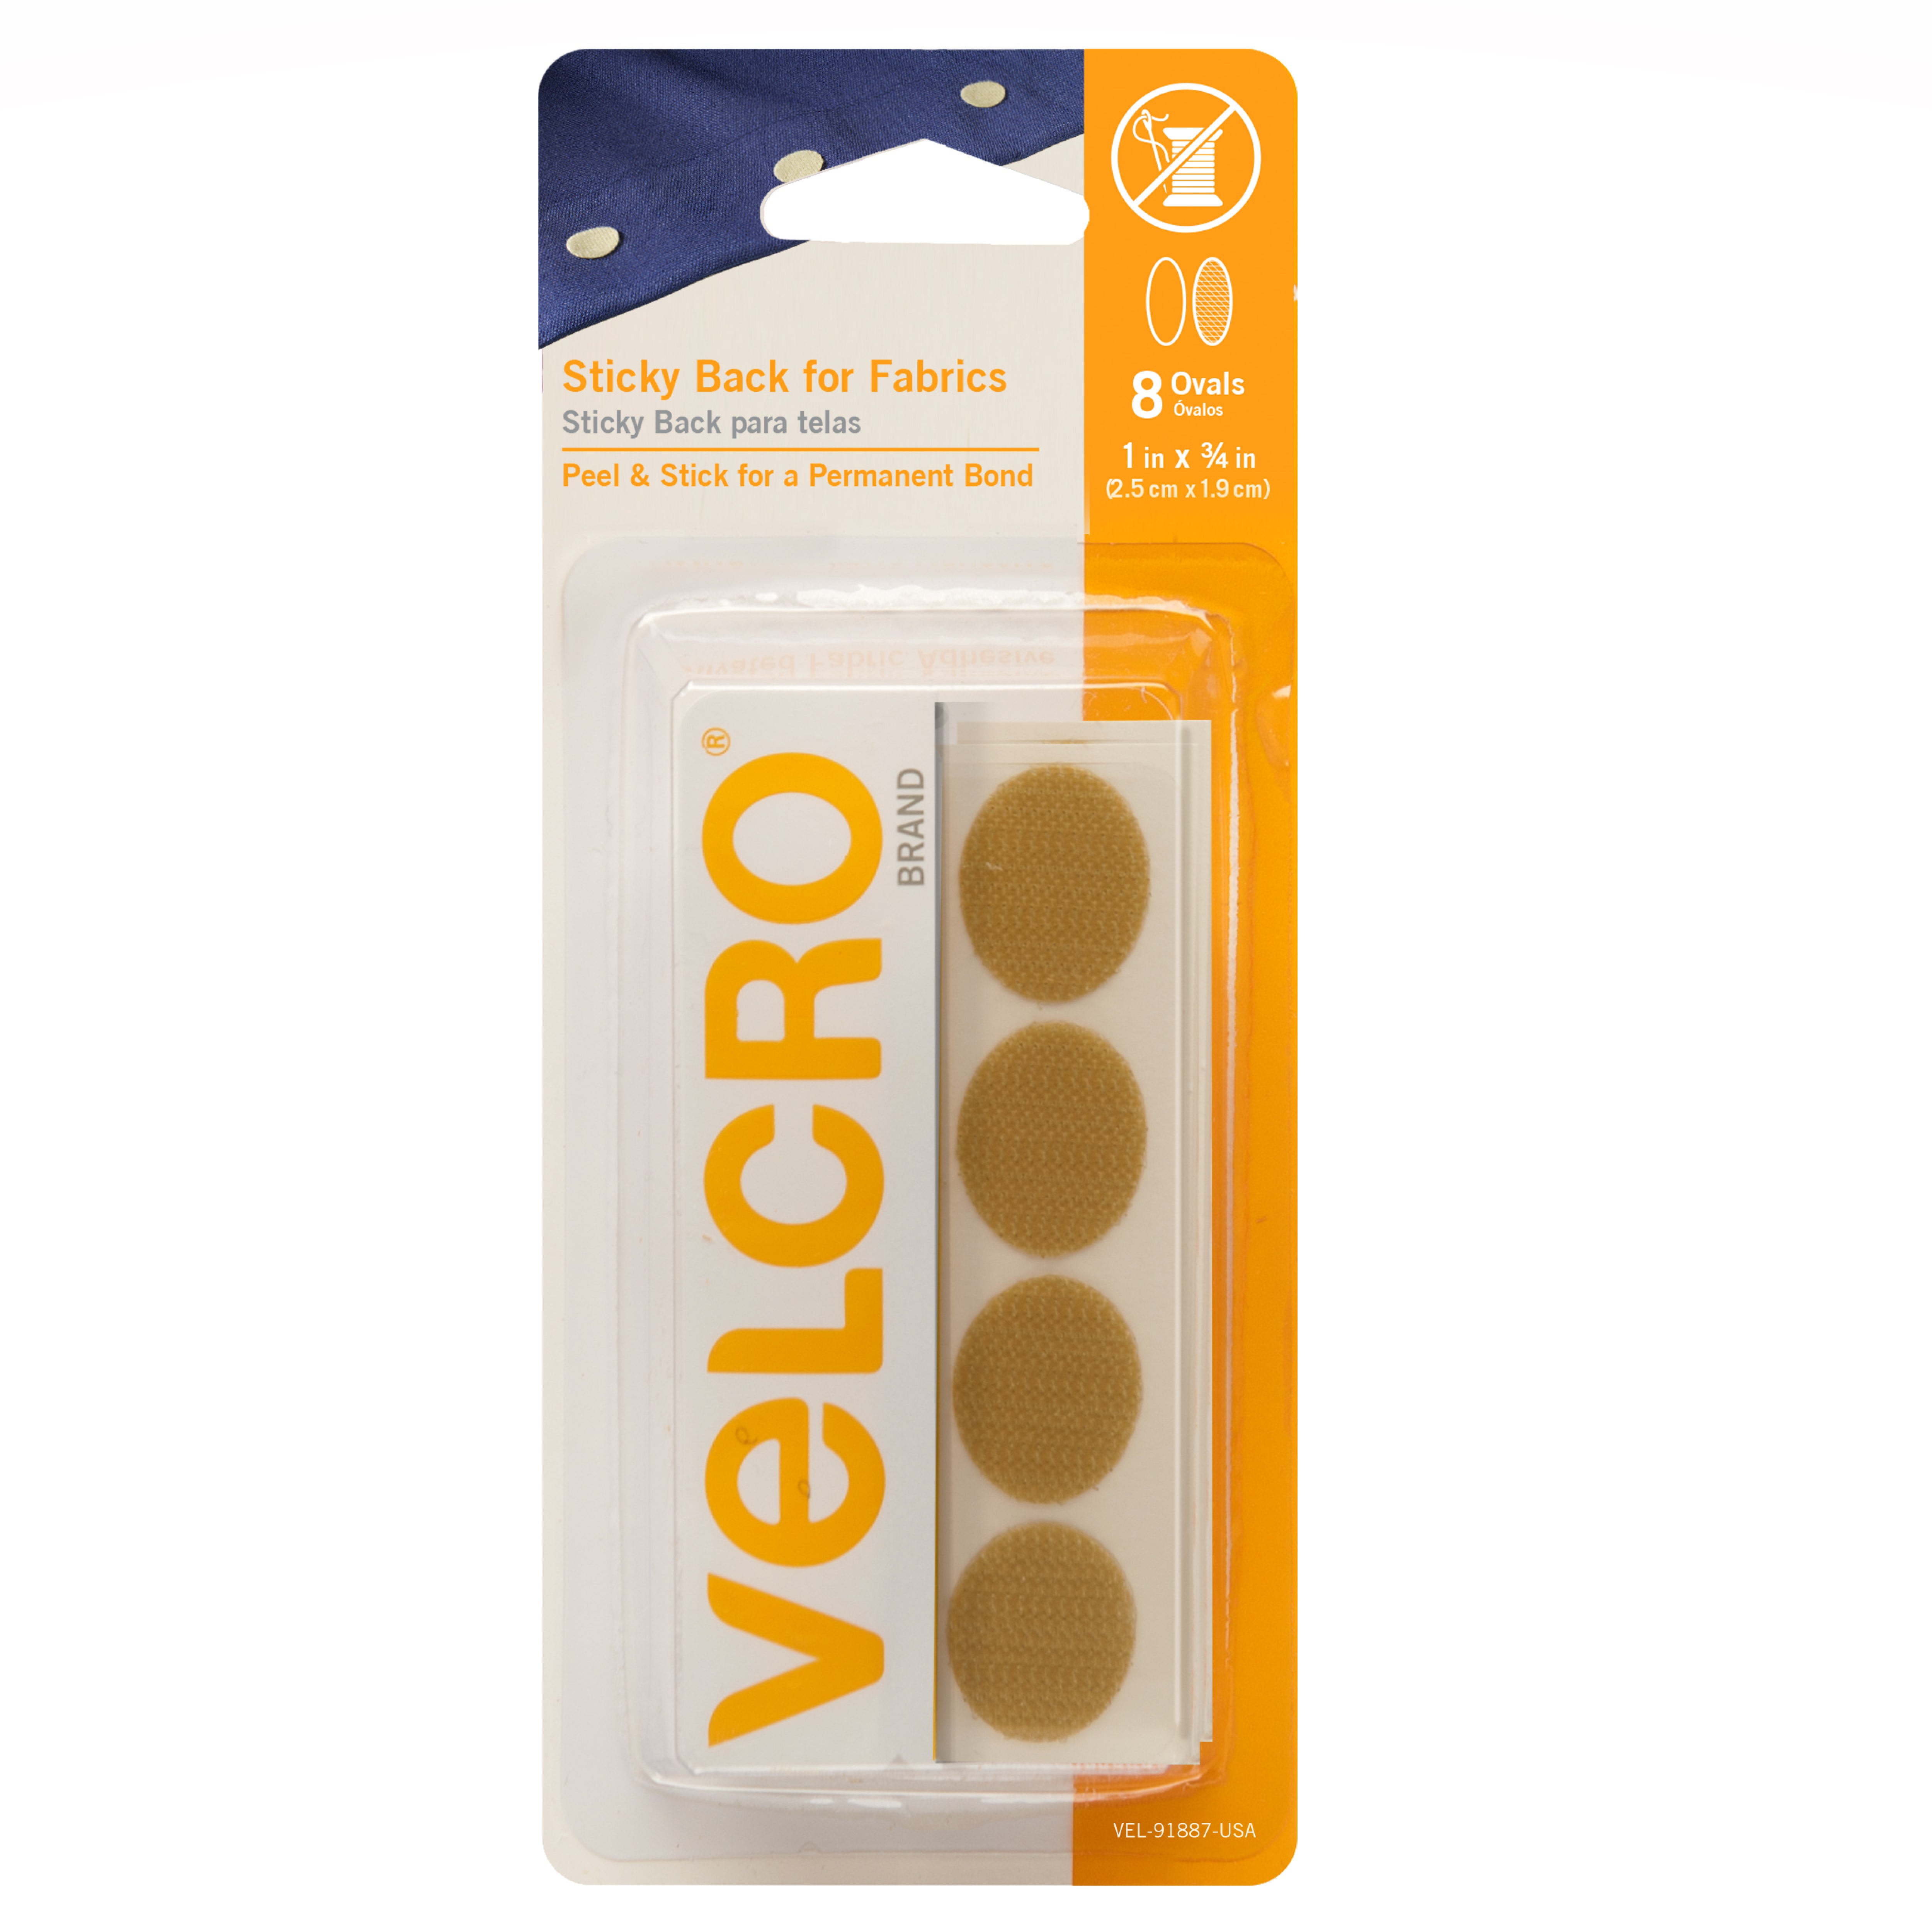 VELCRO Brand For Fabrics | Sew On Fabric Tape for Alterations and Hemming |  No Ironing or Gluing | Ideal Substitute for Snaps and Buttons | 24in x